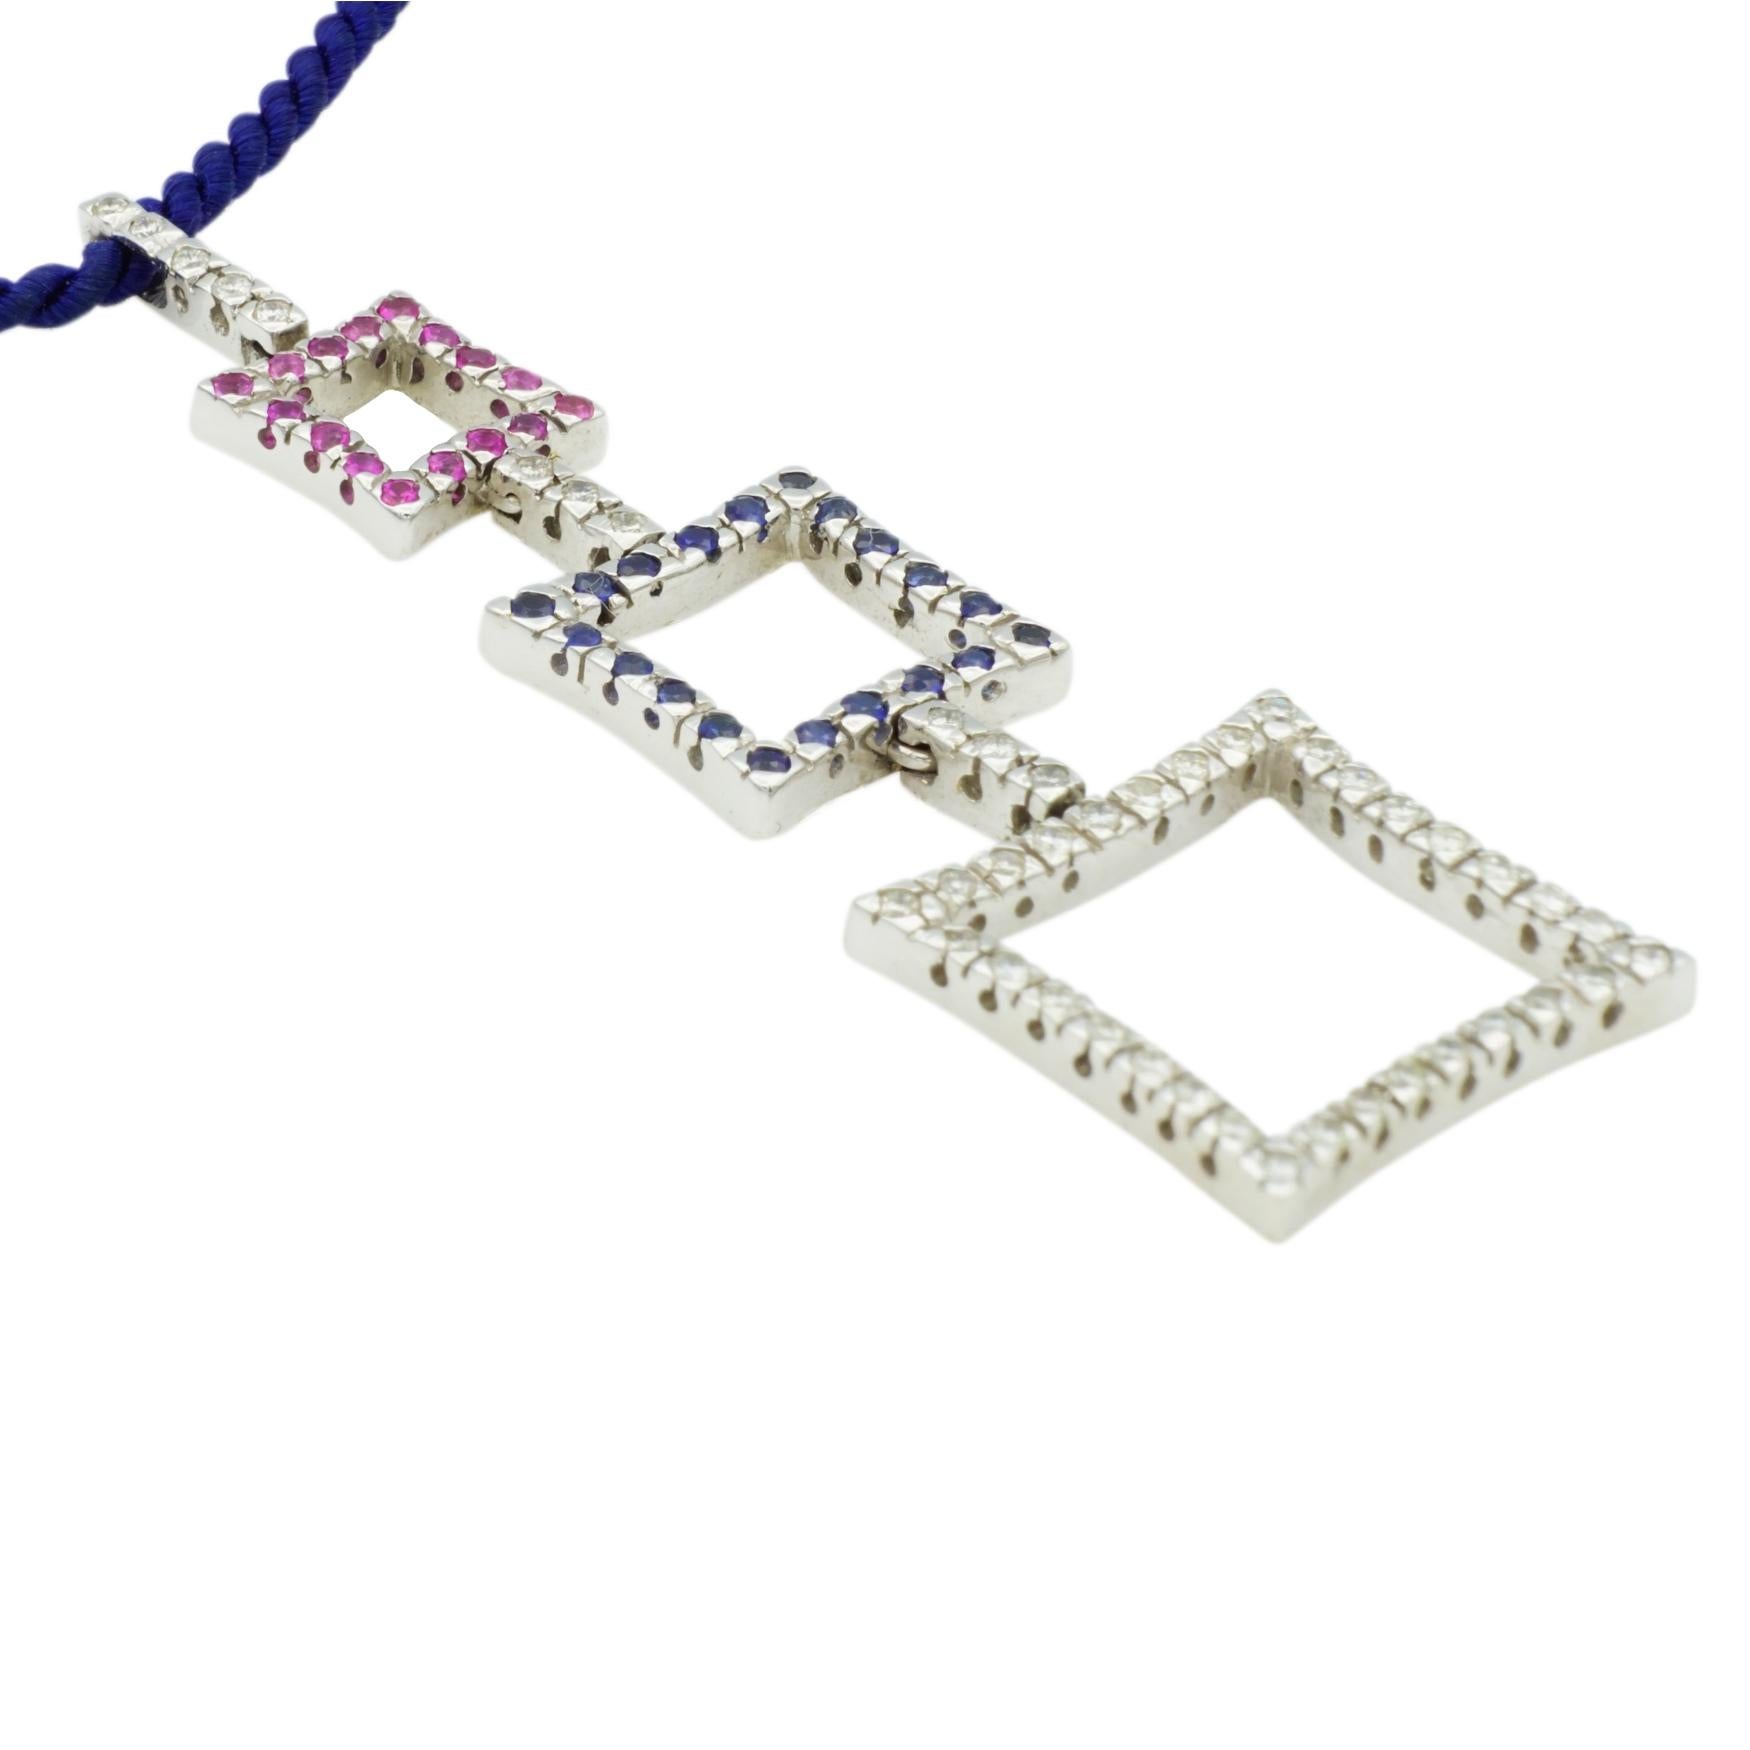 NEW, Contemporary 18kt white gold diamond, vibrant pink sapphire, and blue sapphire designer pendant on a blue silk rope necklace that has an 18kt white gold lobster clasp. Necklace length: 15 Inches; Pendant height: 50 Millimeters; Pendant width: